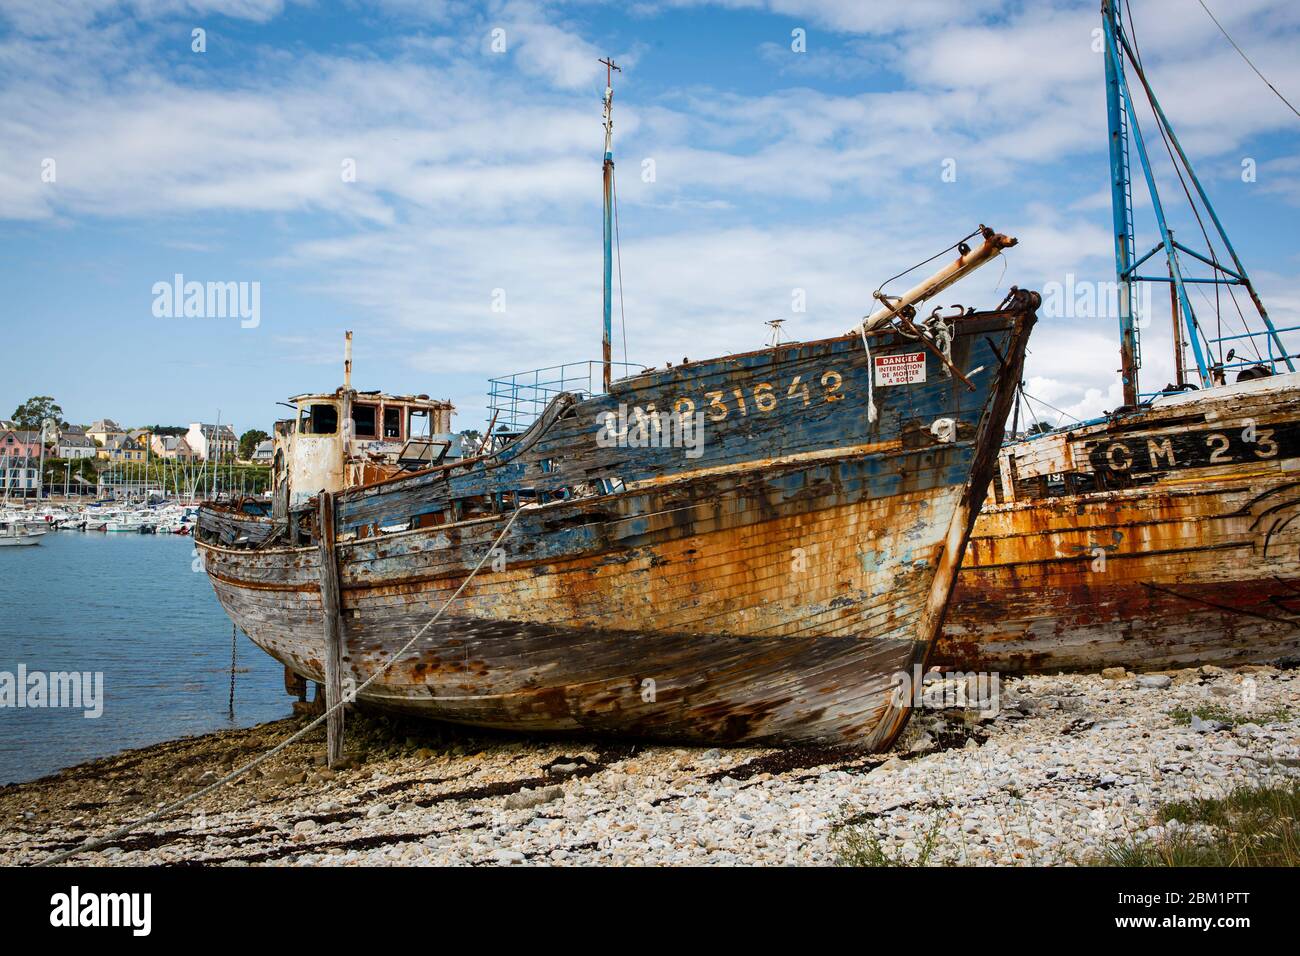 Old ship at the ship cemetery at Camaret-sur-Mer, France. Stock Photo